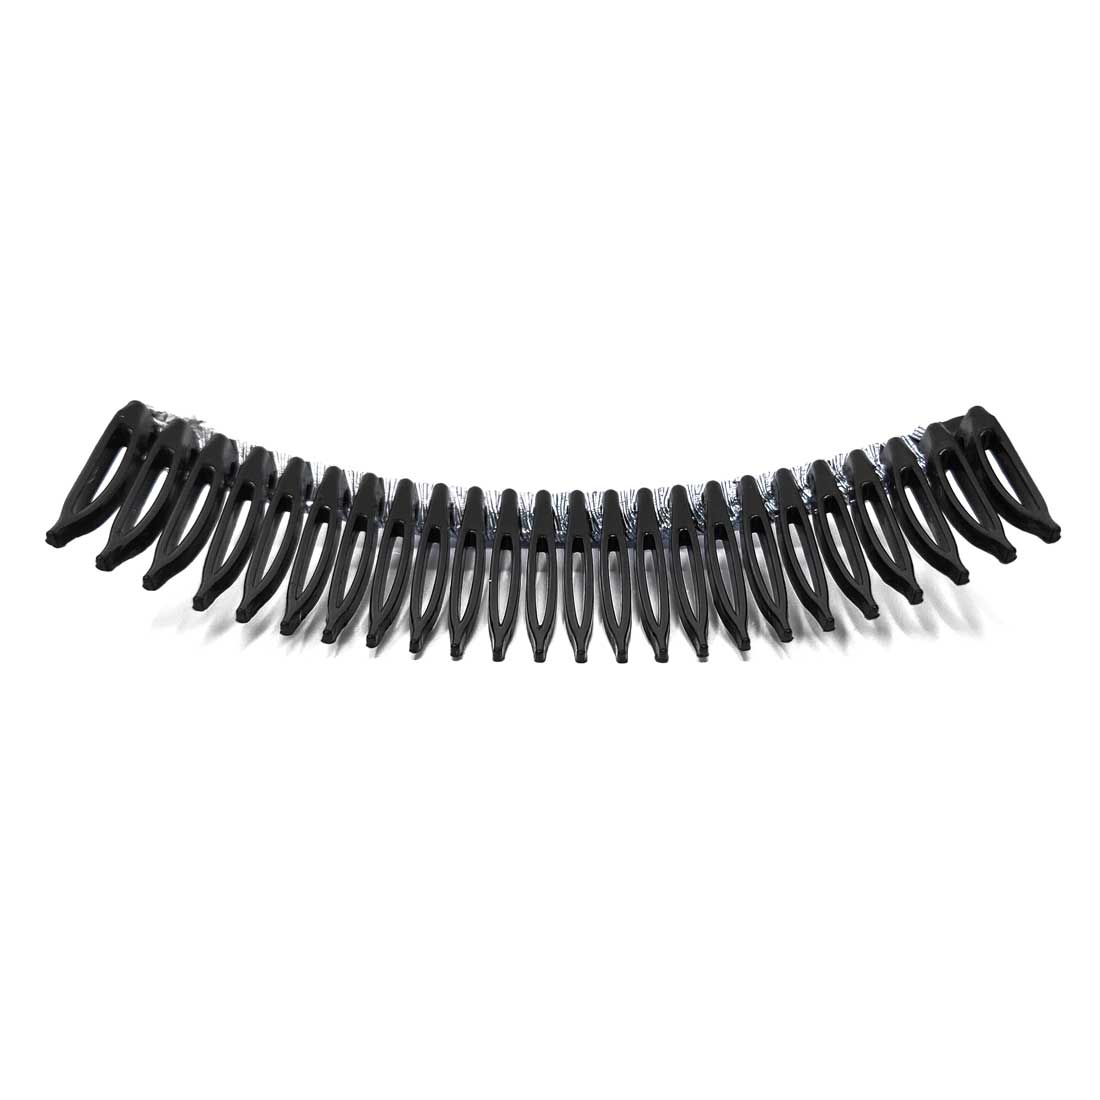 Anokhi Ada Hair Comb Clip for Women and Girls, Black (07-16)